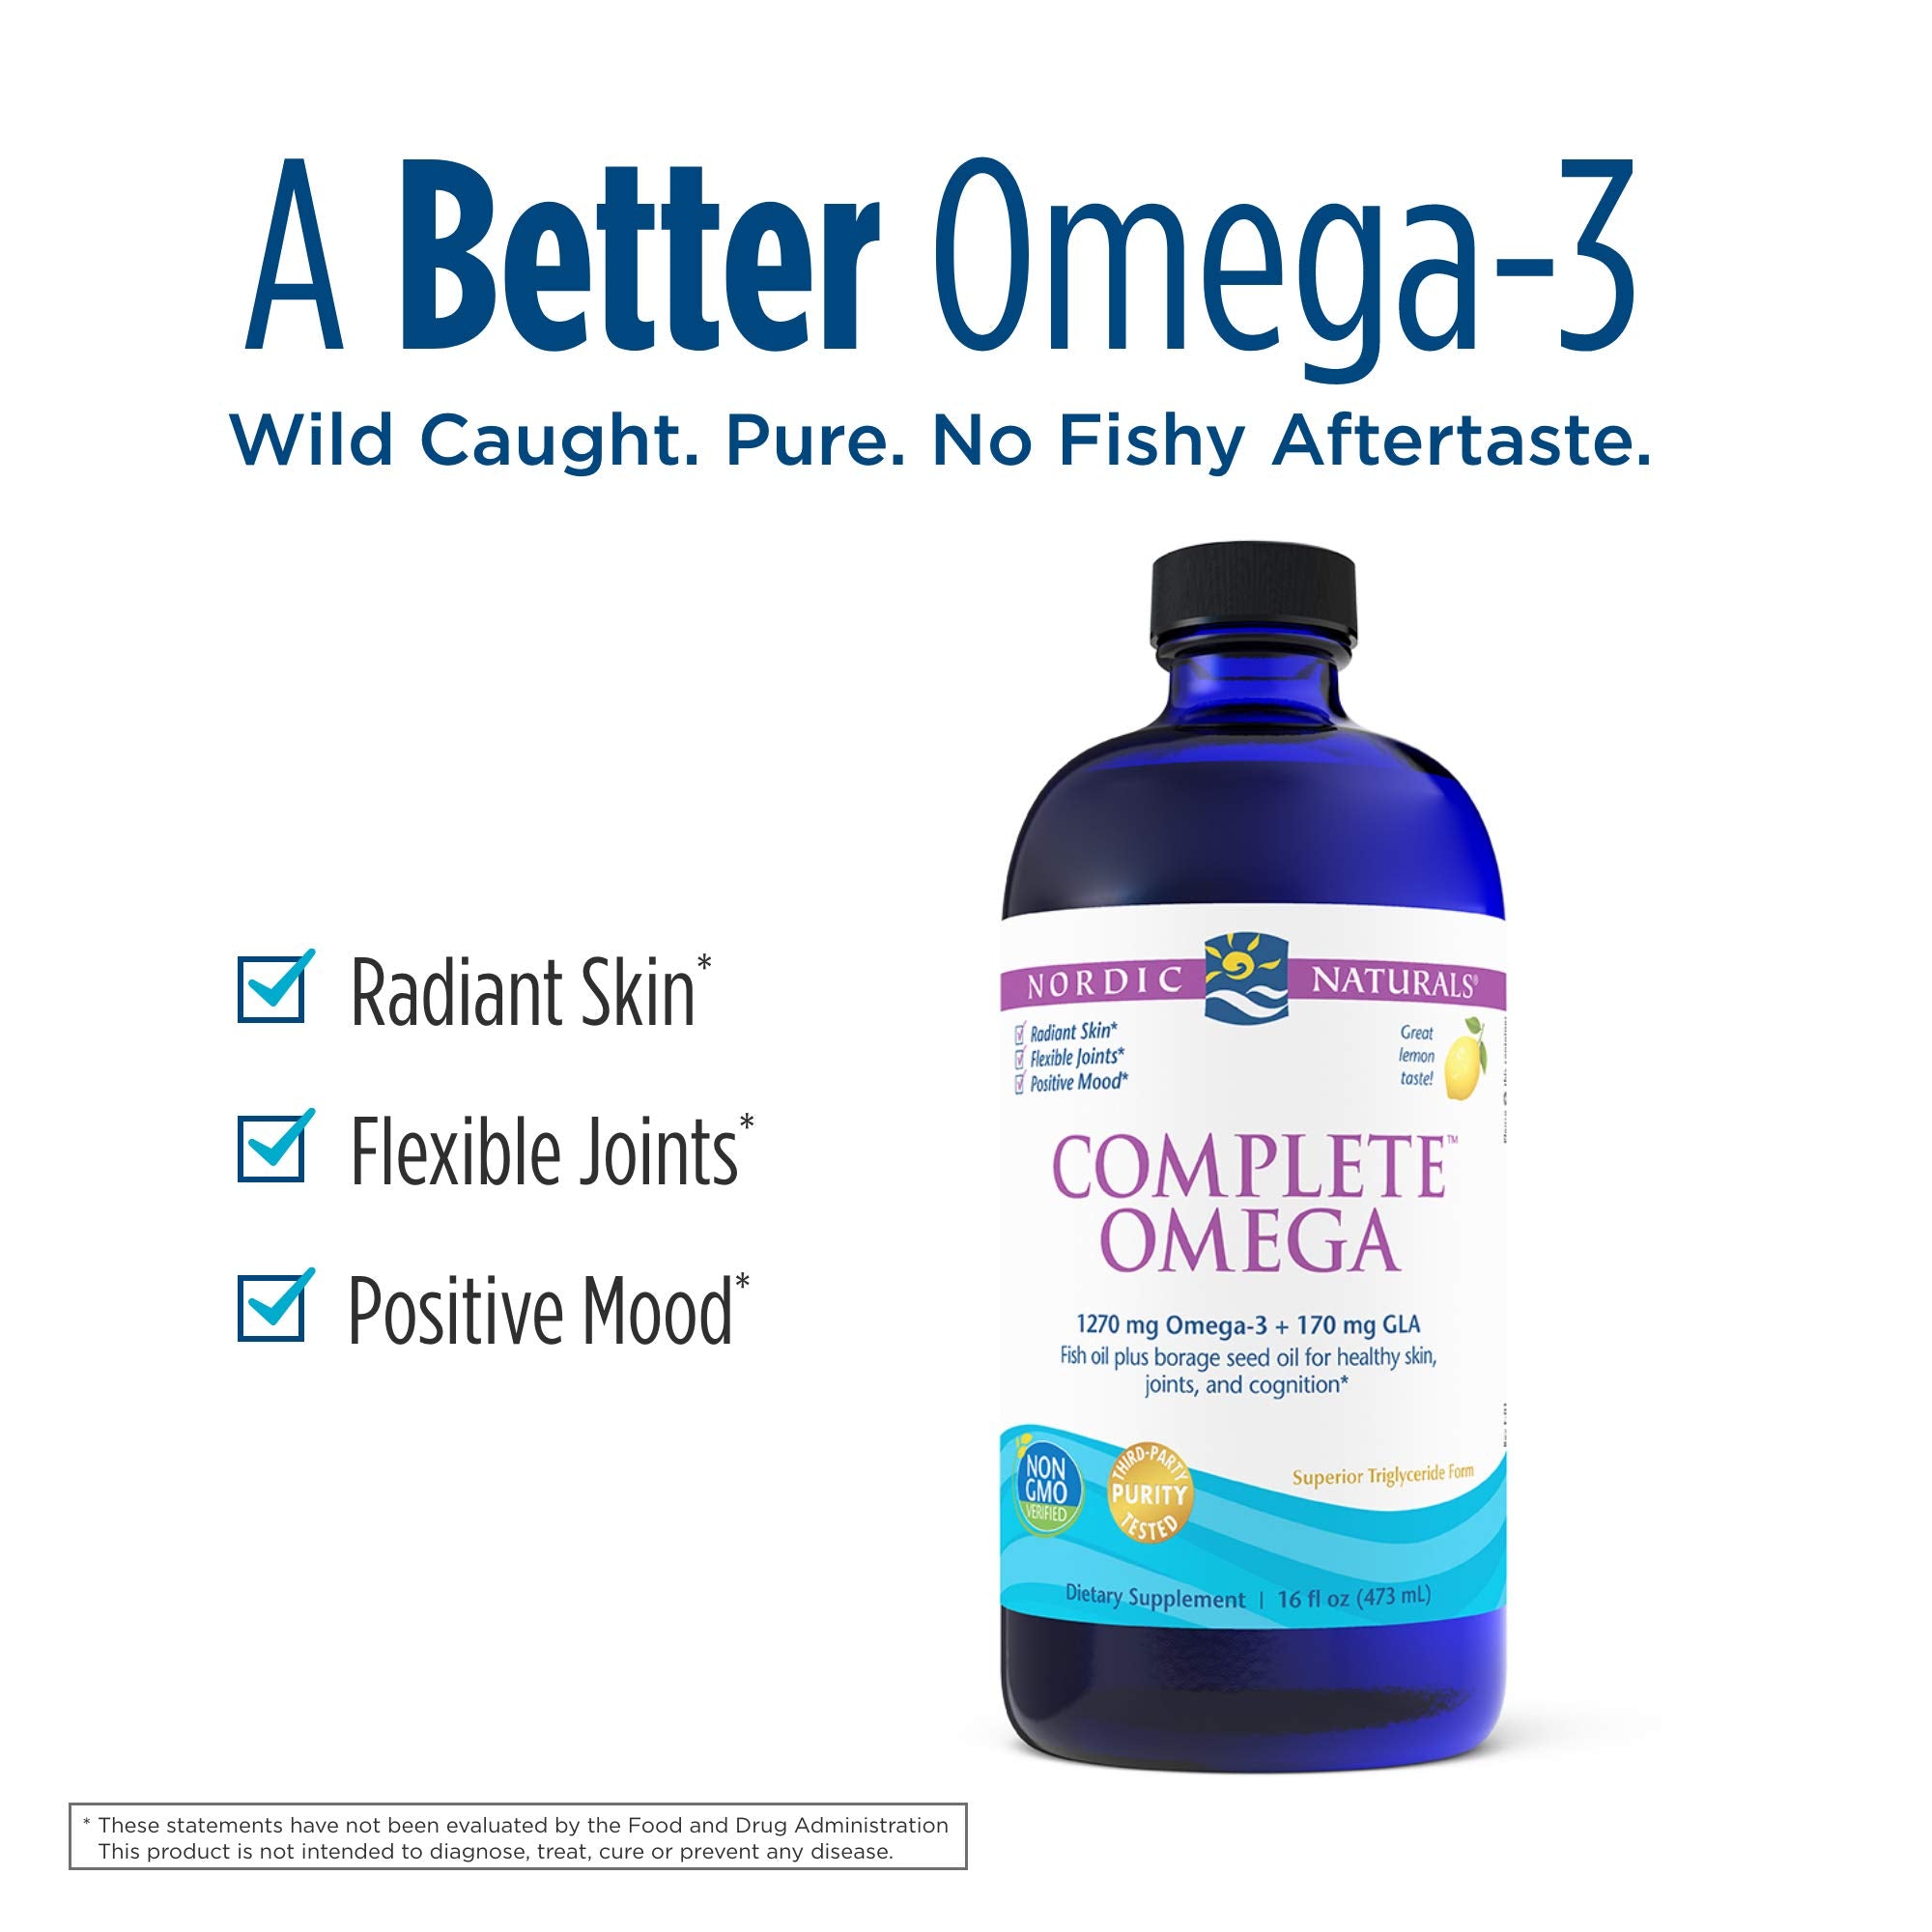 Nordic Naturals Complete Omega - Supports Healthy Skin, Joints, and Cognition, 16 Liquid Ounces